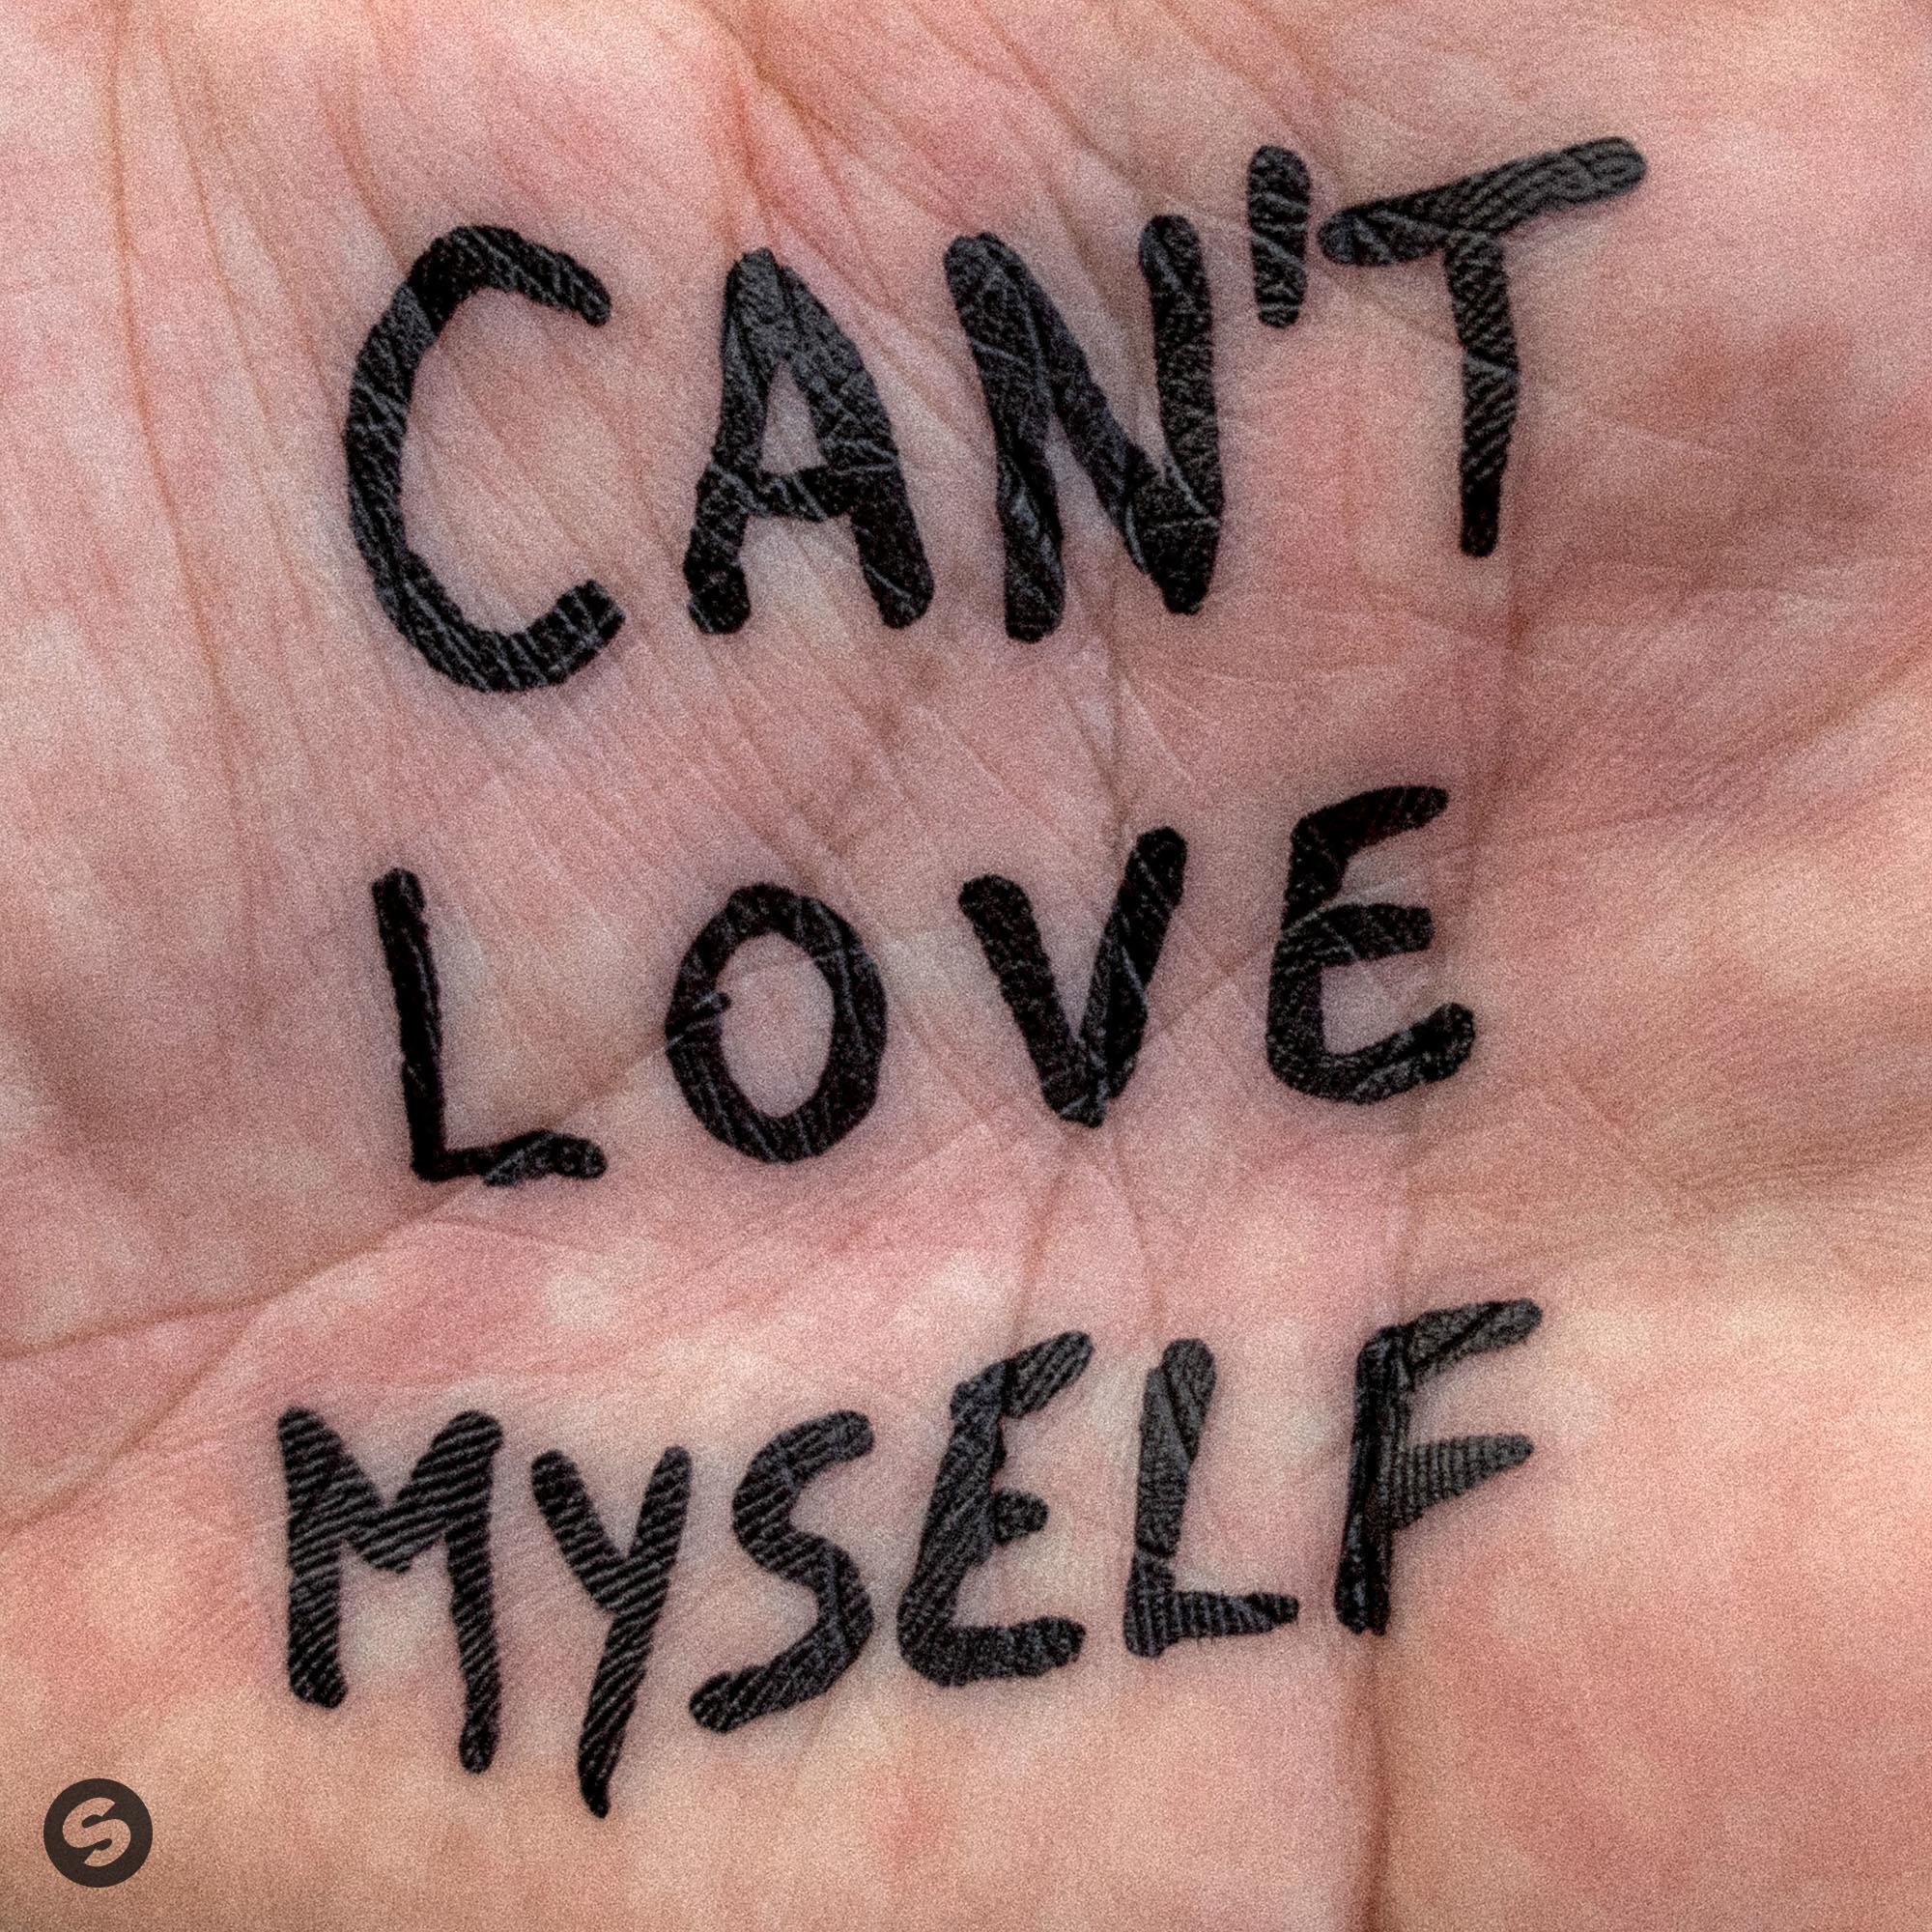 Can't Love Myself (feat. 